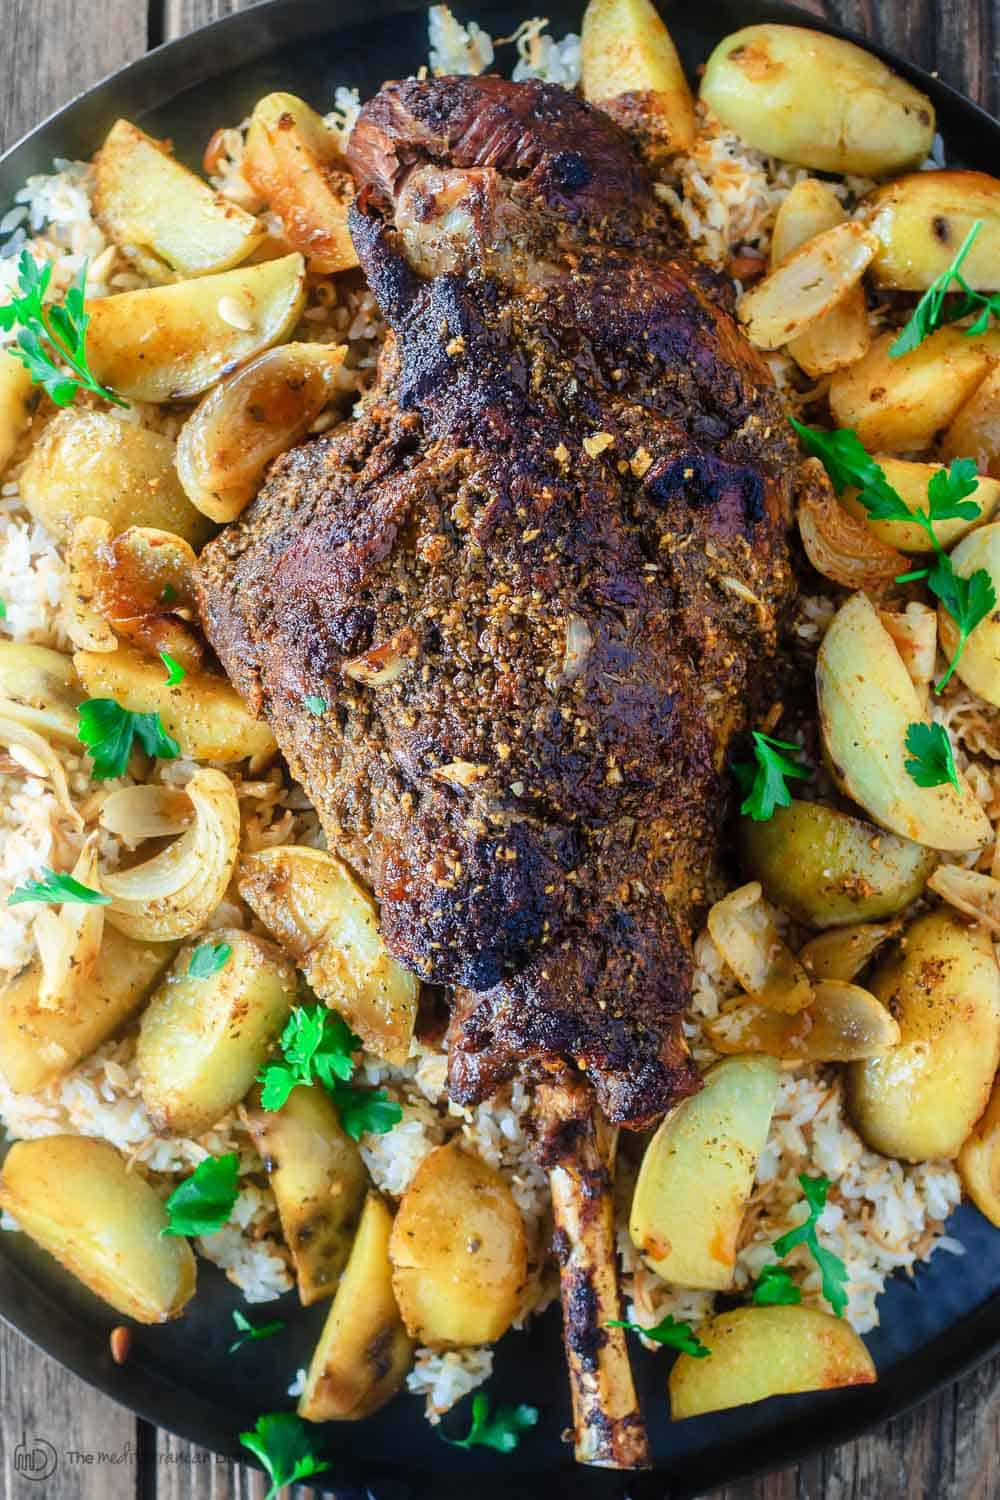 Lebanese-style lamb with honey carrots and baby potatoes